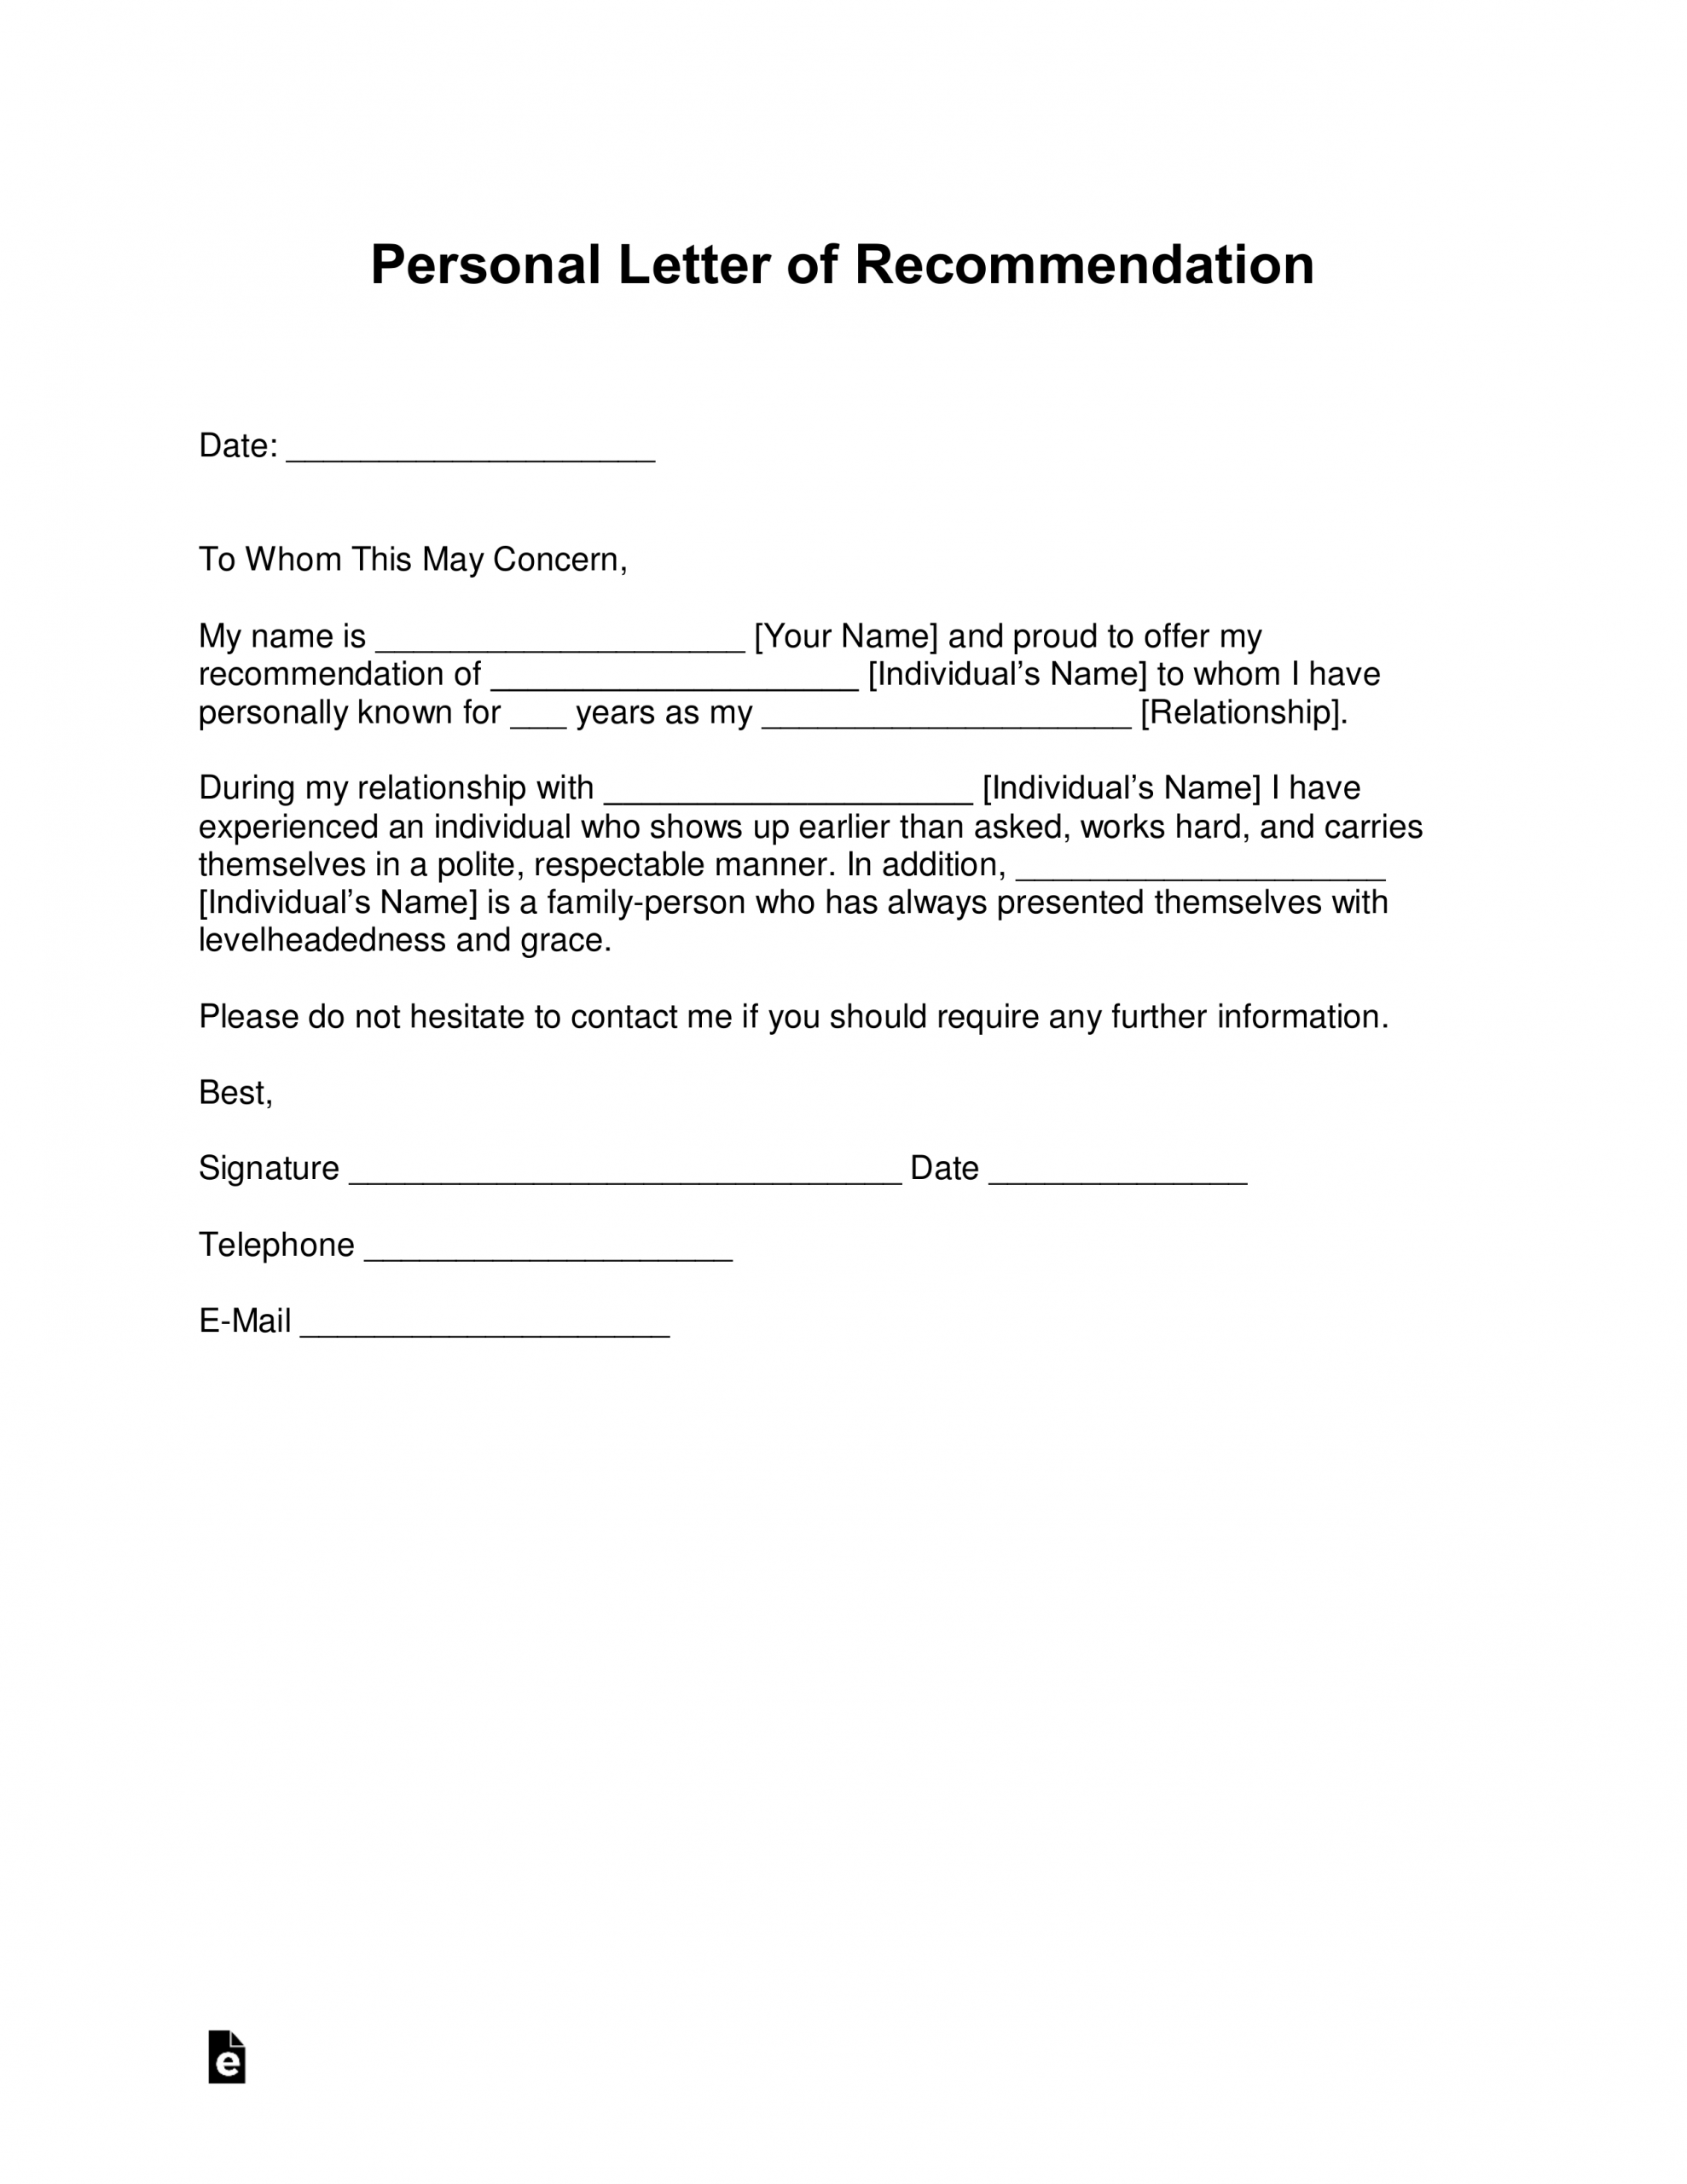 Free Personal Letter Of Recommendation Template For A in sizing 2550 X 3301